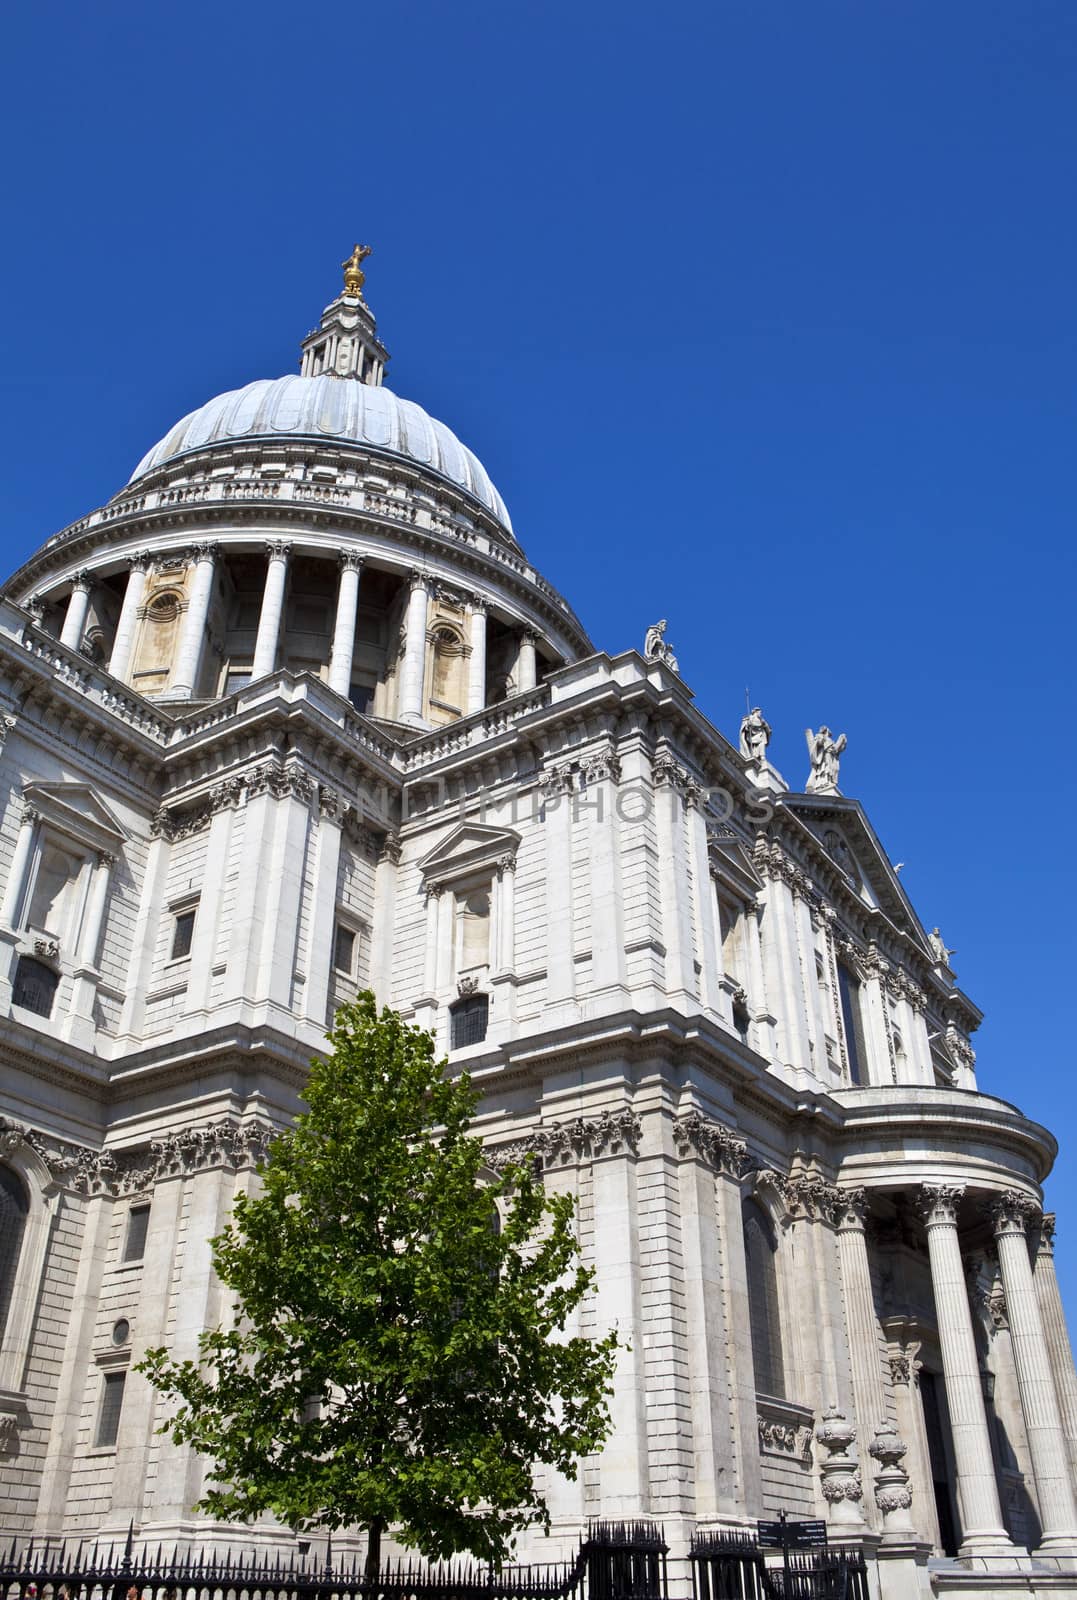 St. Paul's Cathedral in London, England.